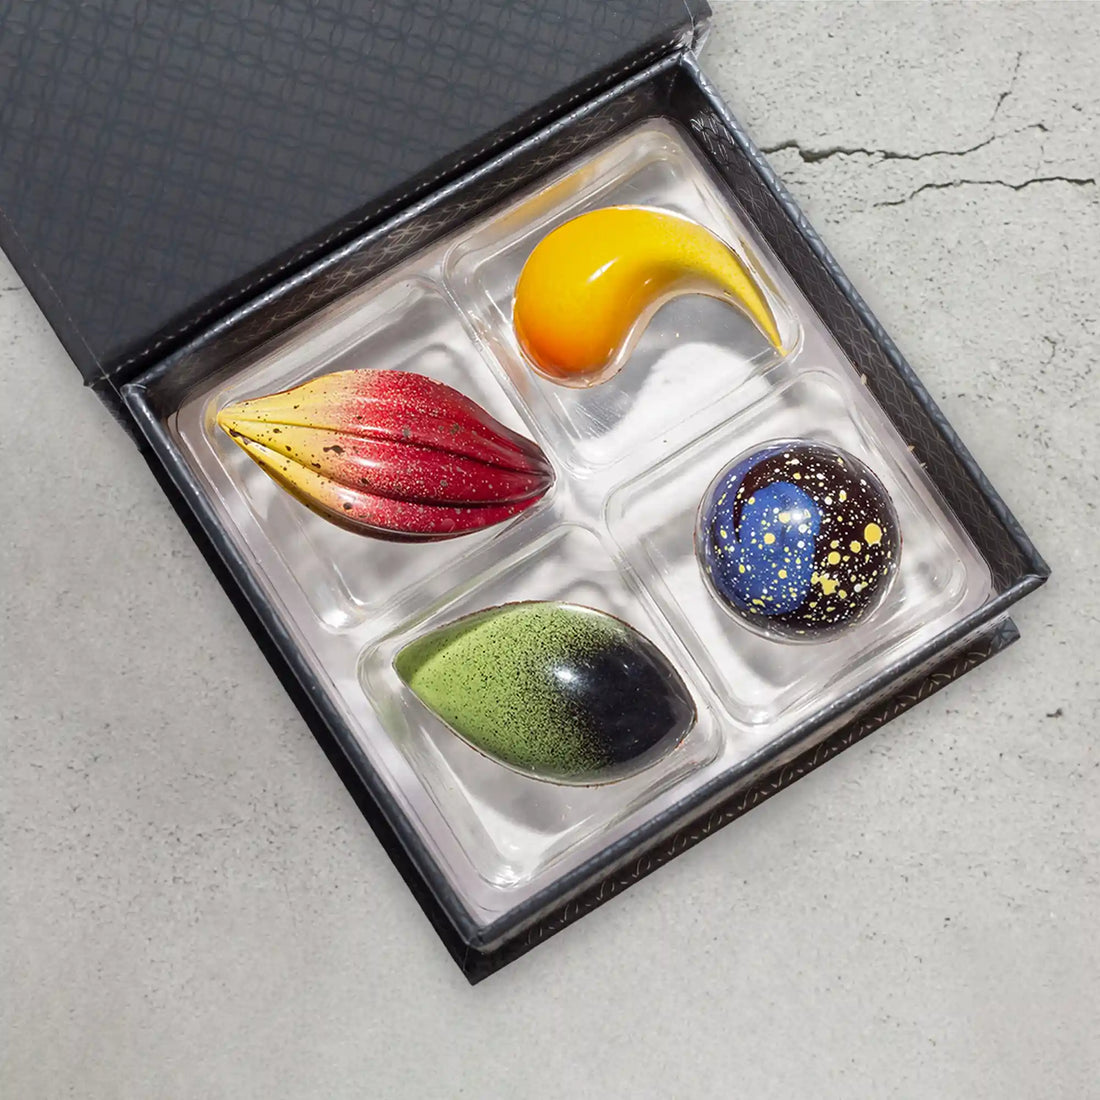 4-piece Luxury Chocolate Gift Box with 4 hand-painted colorful chocolate bonbons